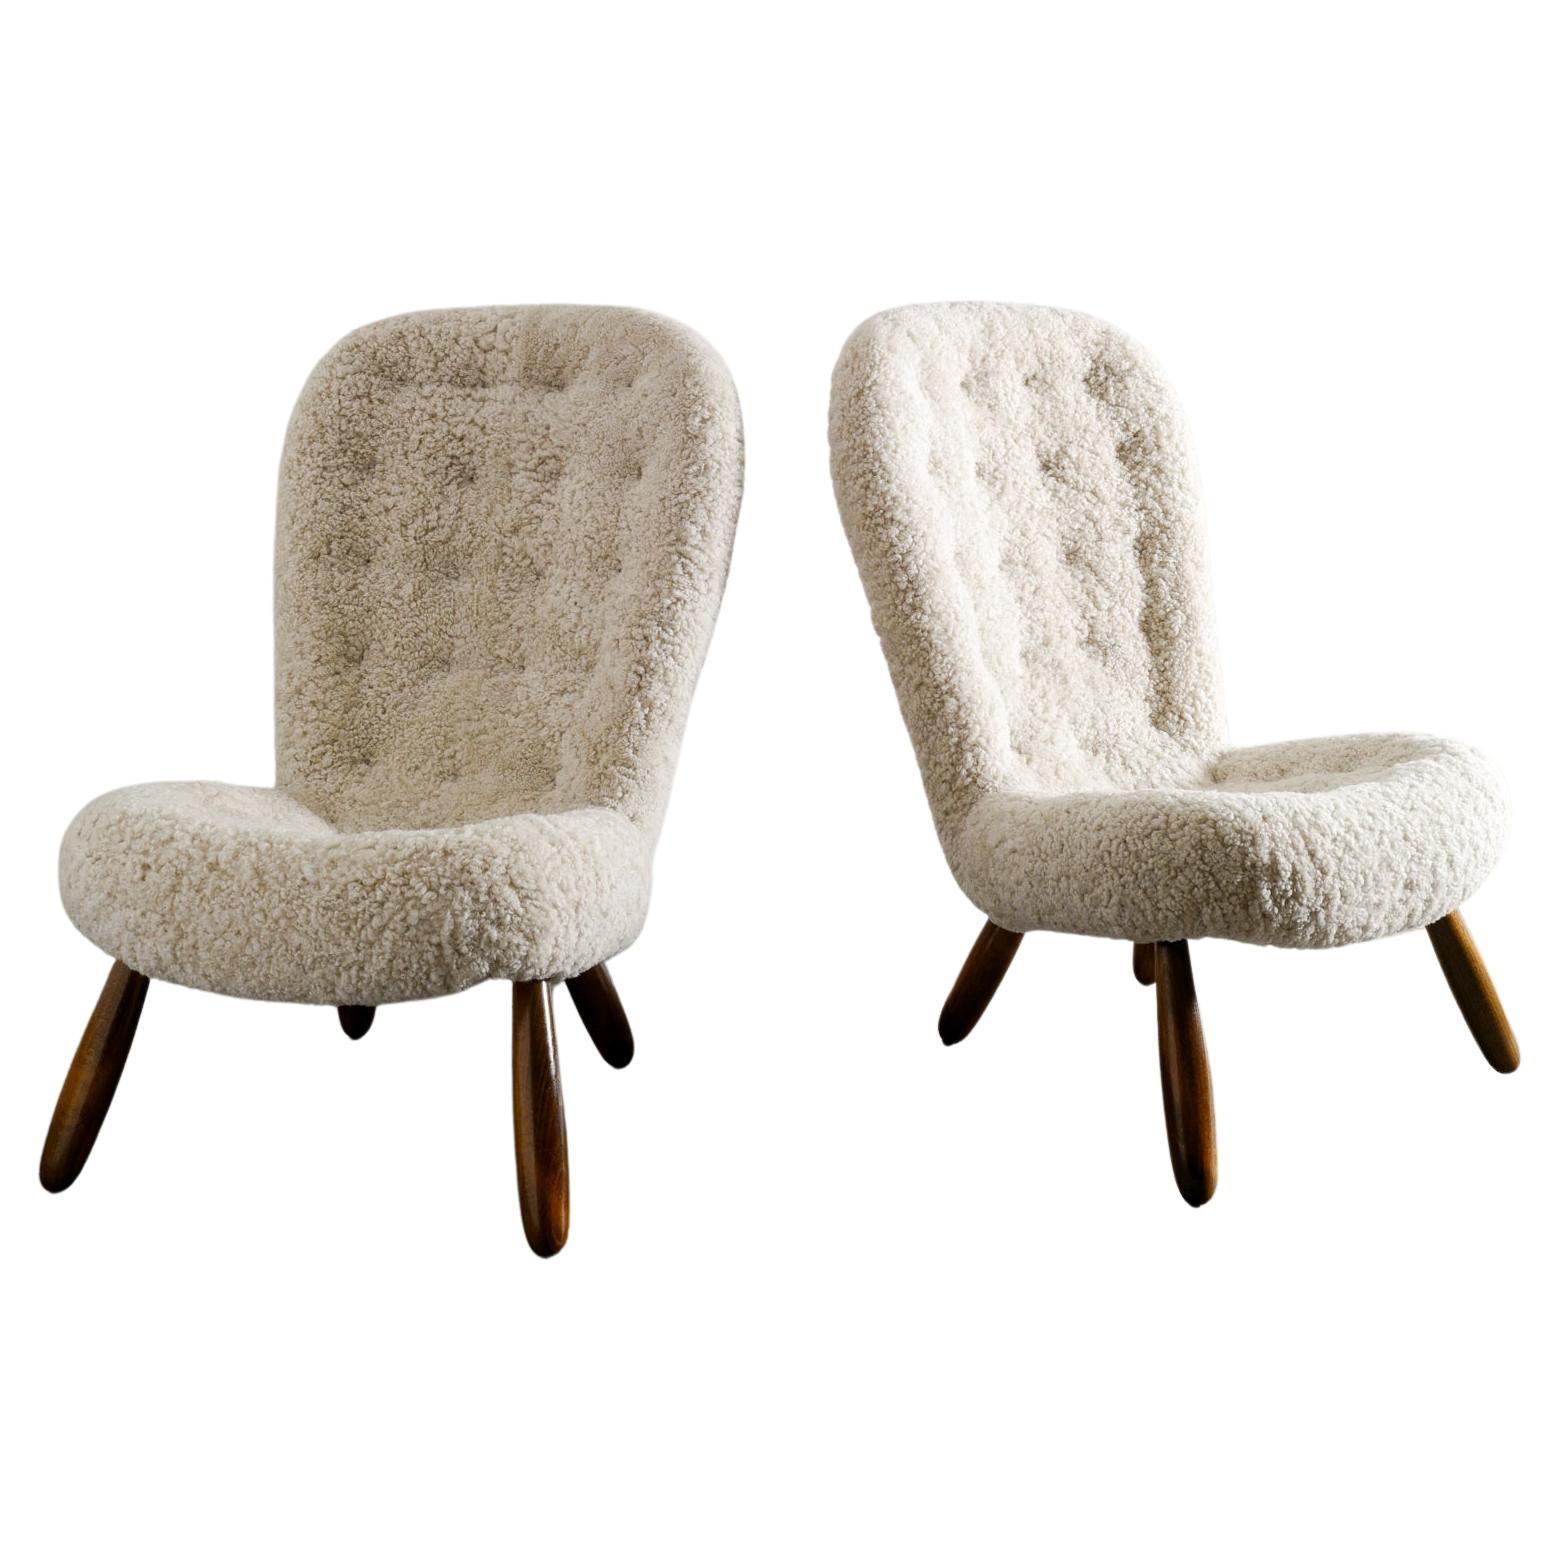 Pair of Arnold Madsen "Clam Chairs" in Sheepskin Produced in Denmark, 1940s 